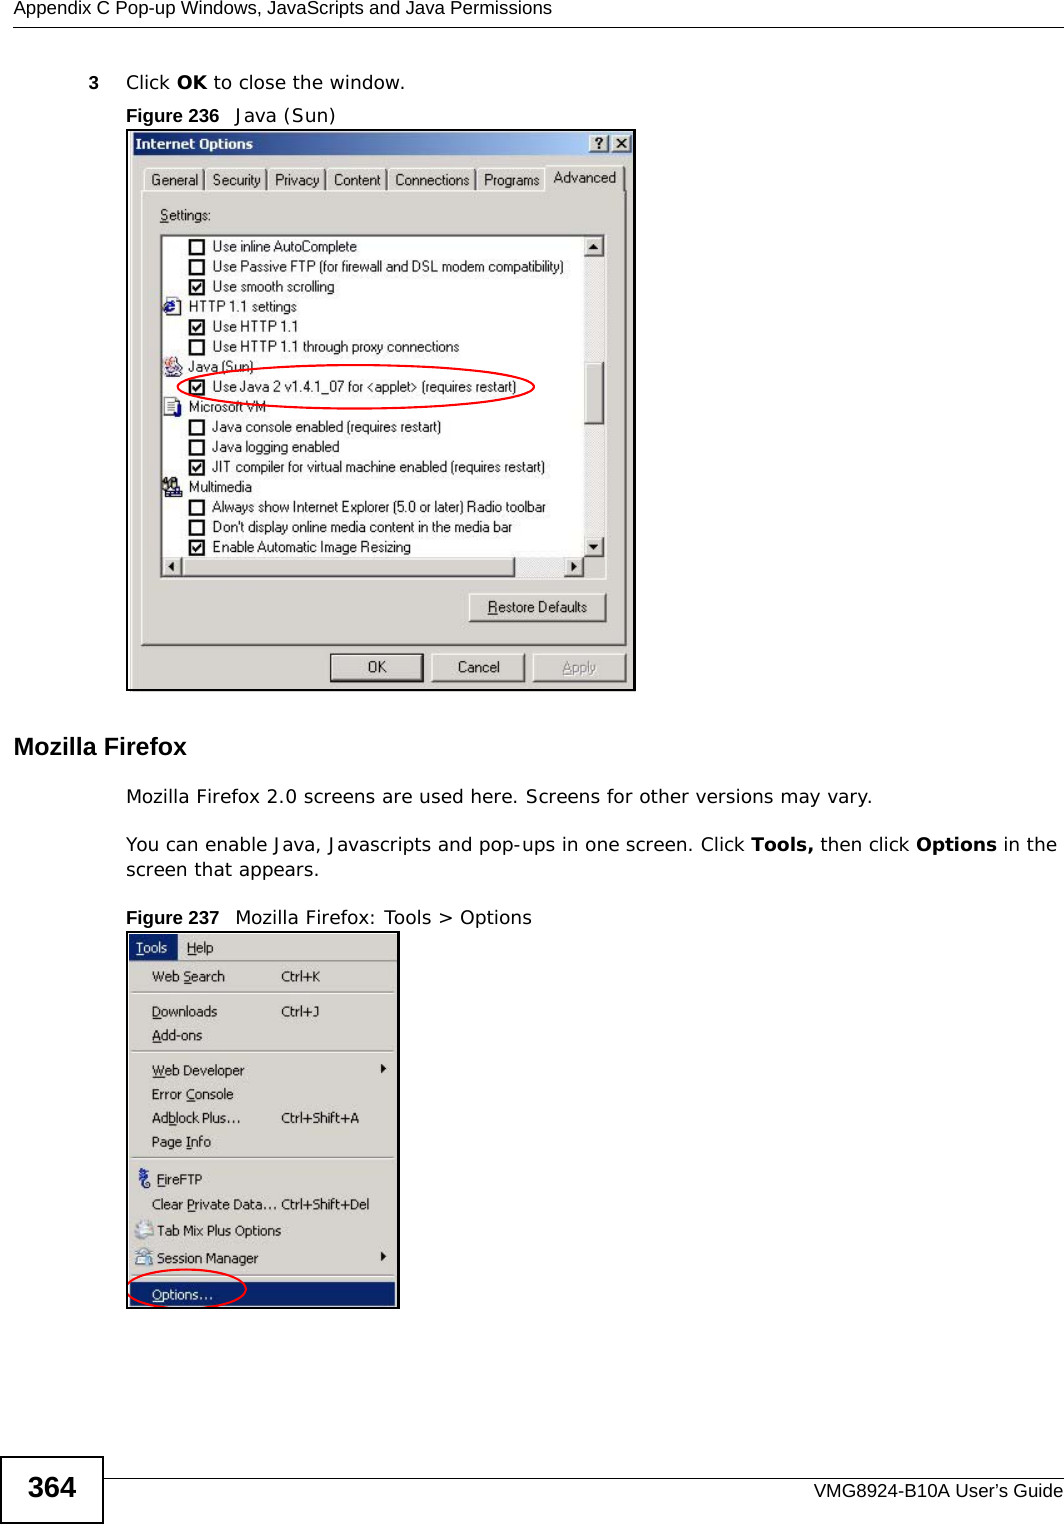 Appendix C Pop-up Windows, JavaScripts and Java PermissionsVMG8924-B10A User’s Guide3643Click OK to close the window.Figure 236   Java (Sun)Mozilla FirefoxMozilla Firefox 2.0 screens are used here. Screens for other versions may vary. You can enable Java, Javascripts and pop-ups in one screen. Click Tools, then click Options in the screen that appears.Figure 237   Mozilla Firefox: Tools &gt; Options